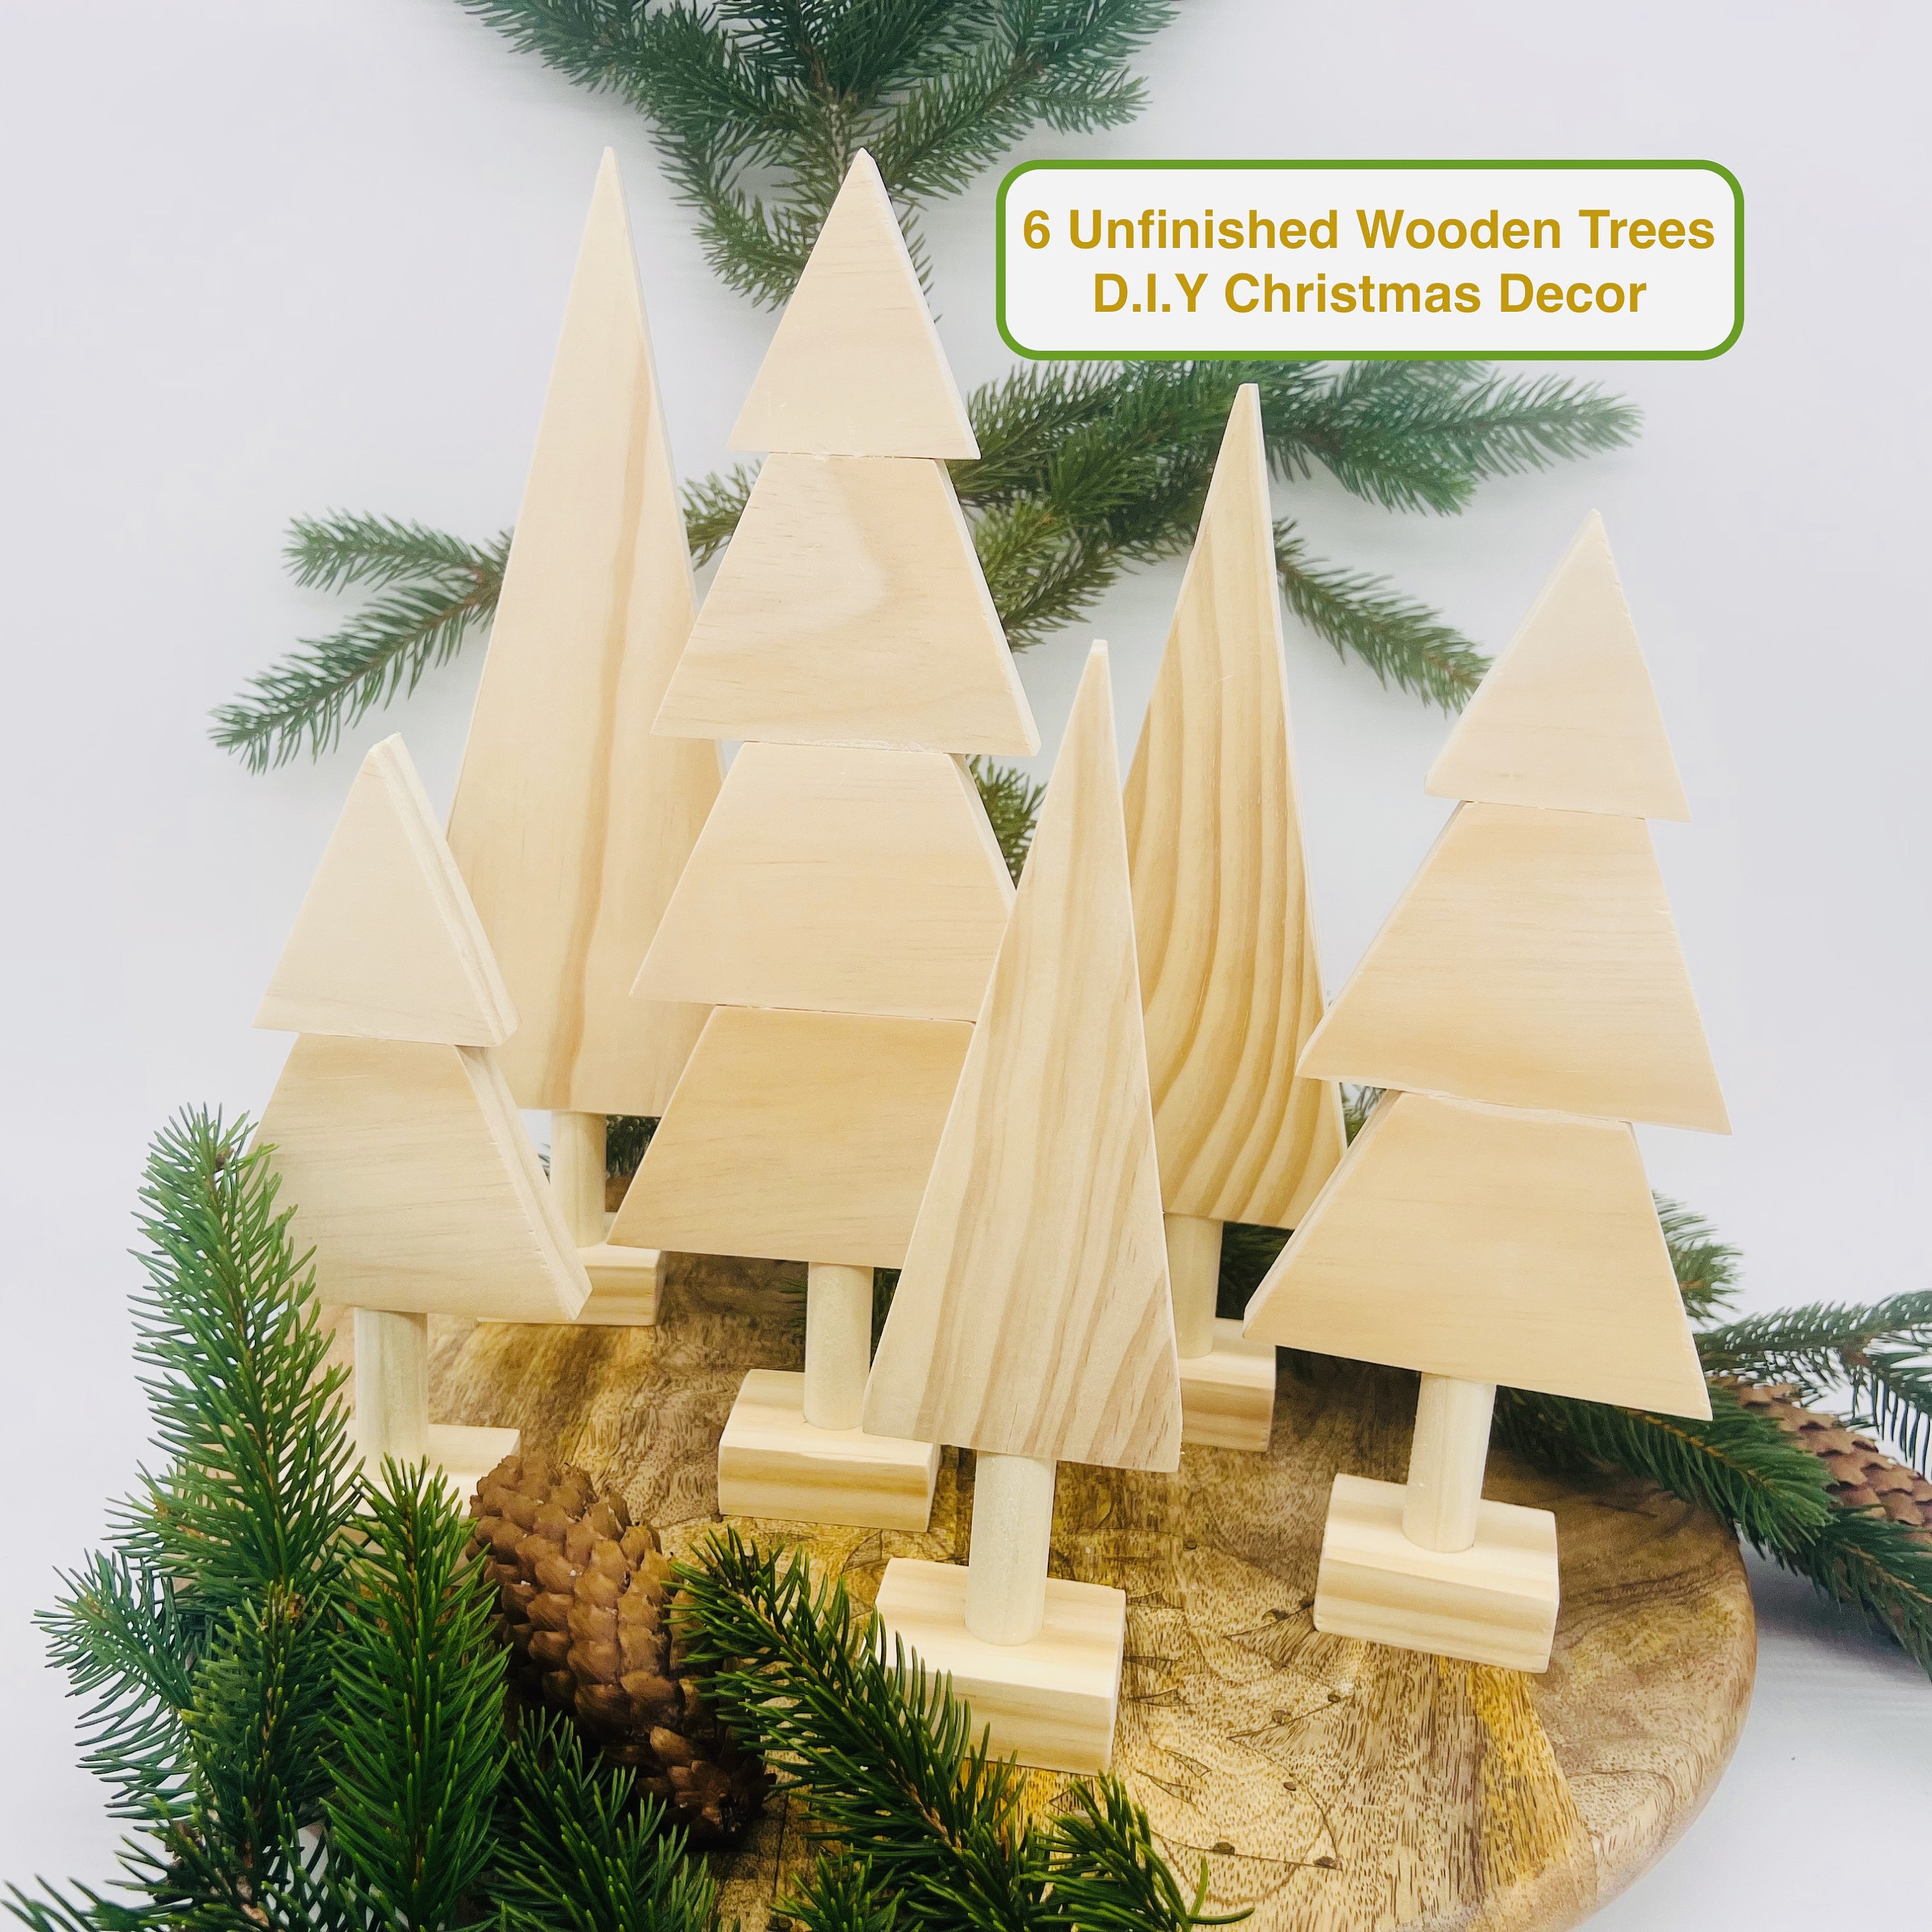 Christmas 3 Decorative Trees Wood Crafts DIY Decor New Year Present  Unfinished Wooden Holiday Decor Ornament Table Decoration 